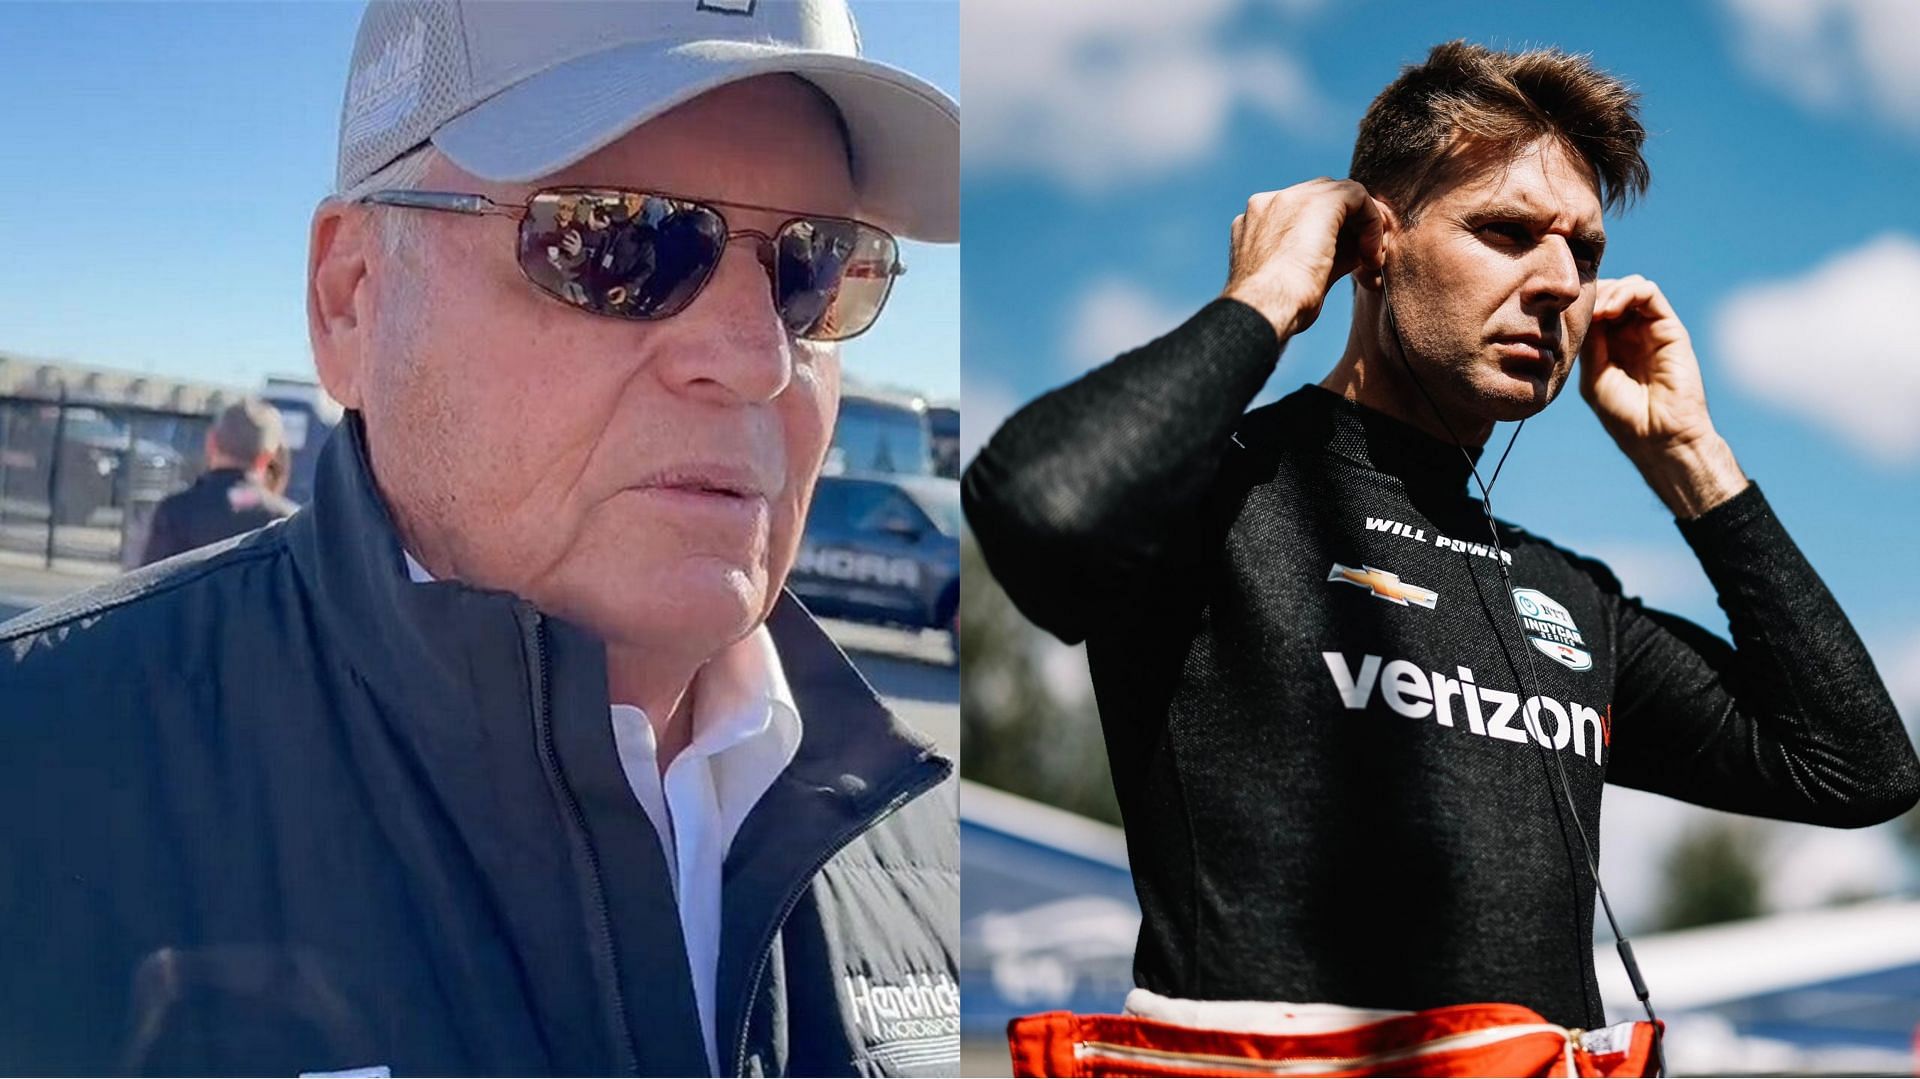 IndyCar champion Will Power gifted Hendrick Motorsports owner Rick Hendrick (Image from X)